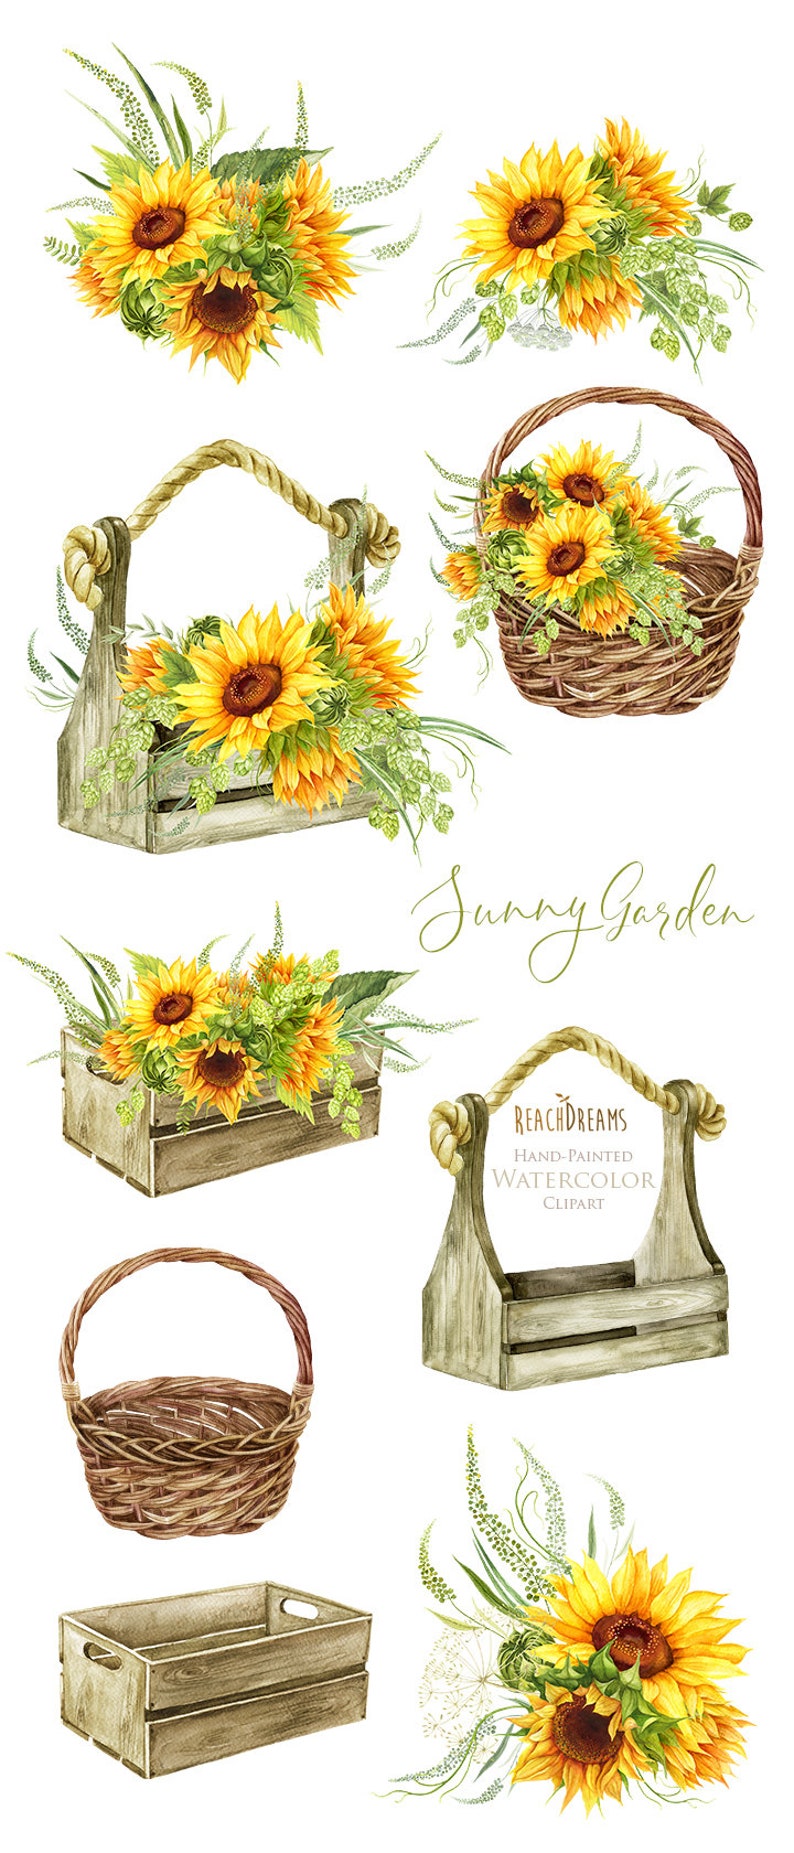 Sunflowers Watercolor Flower clipart, Hand painted, DIY Clip Art, Summer Herb, Bohemian Boho, floral invitation, greeting card, PNG files image 2